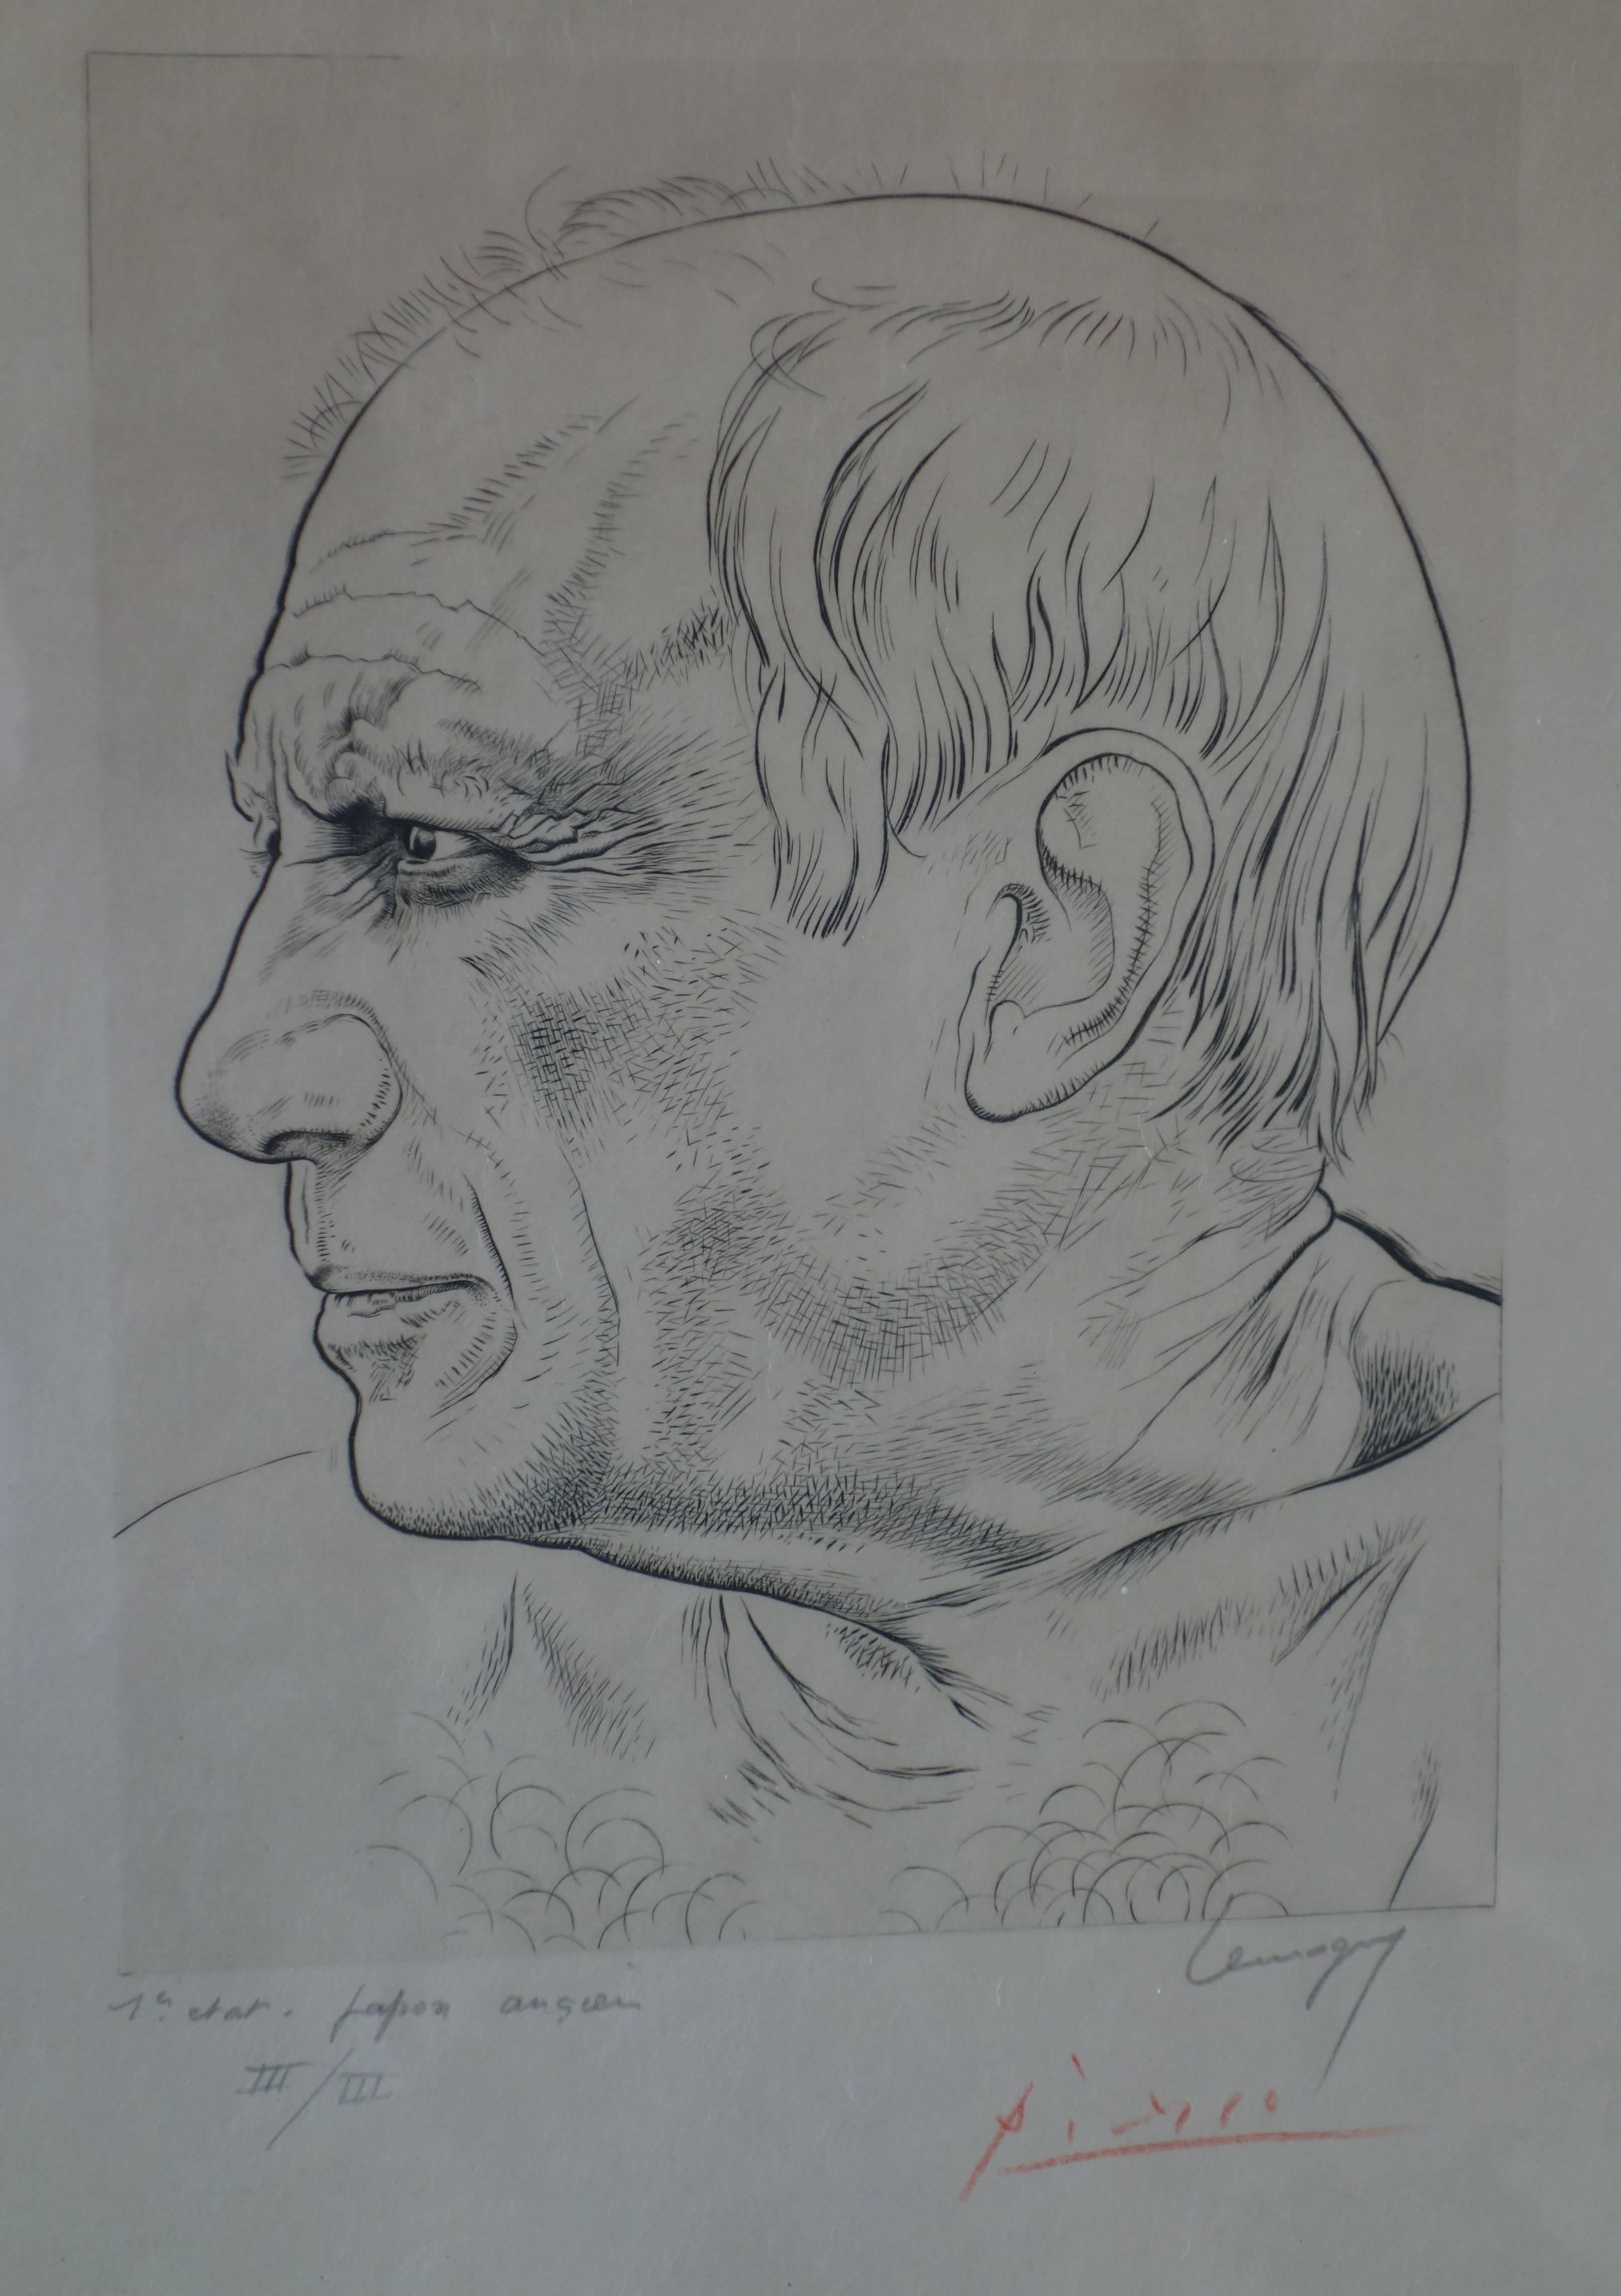 Portrait of Picasso - Original etching - Handsigned by Picasso (only 3 proofs) - Realist Print by Paul Lemagny